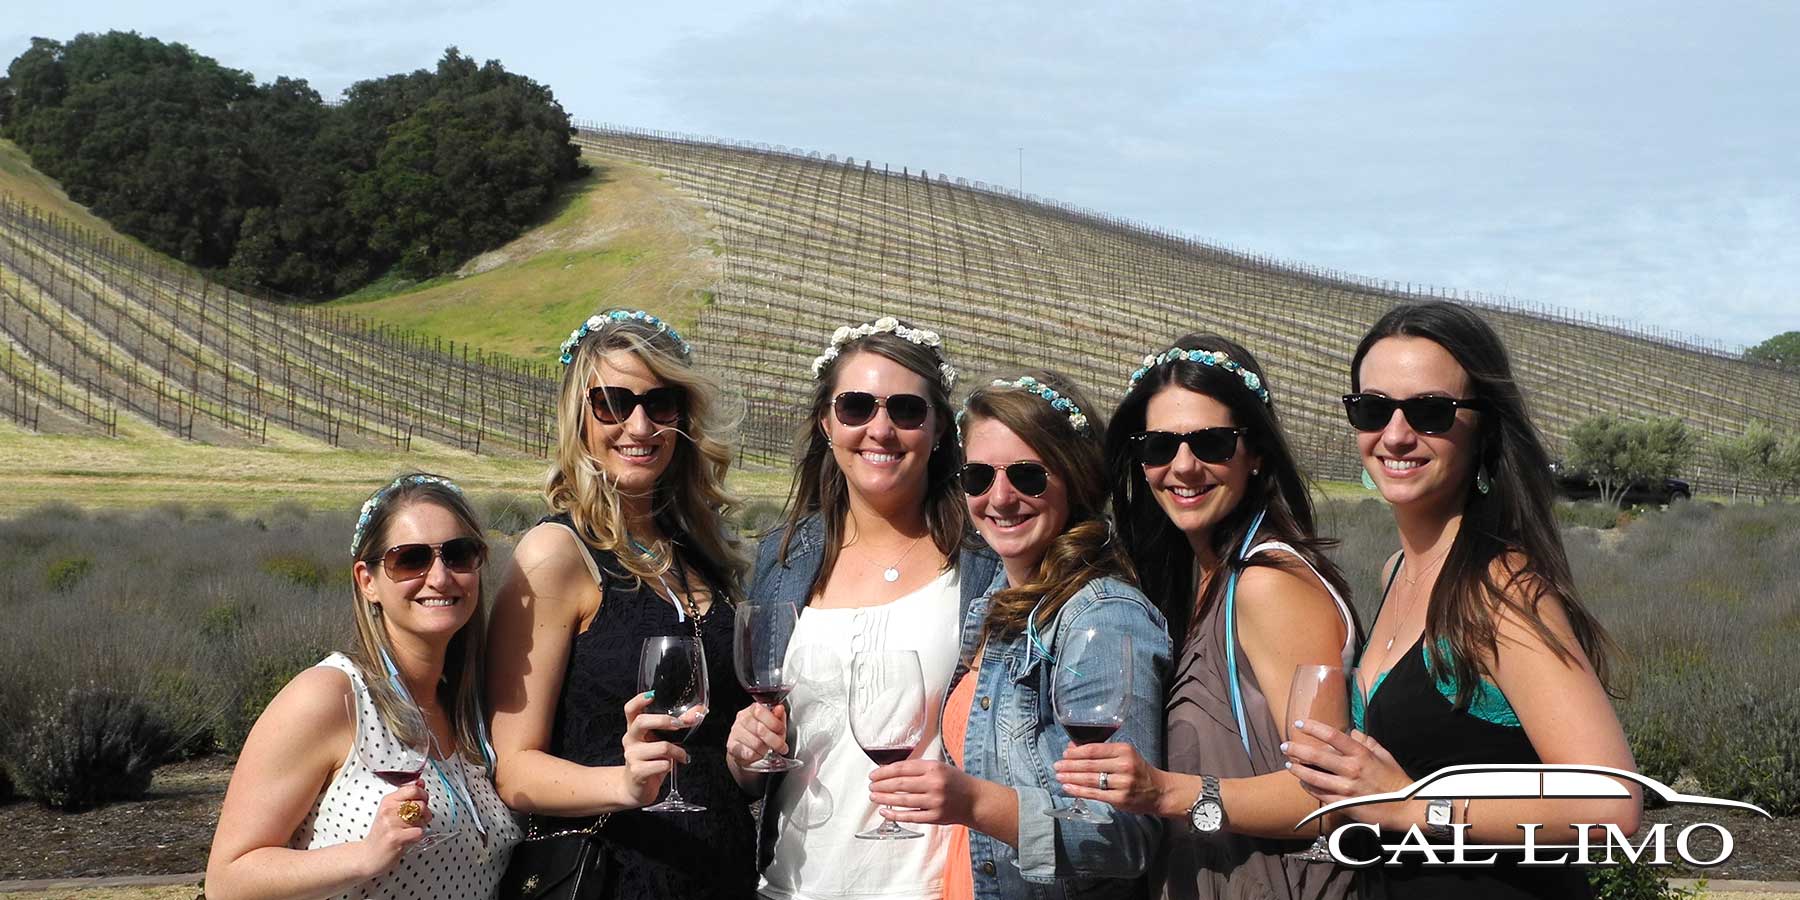 Paso Robles Wine Tours, Paso Robles Wine Tours, Wine Tours Paso Robles, Wine Tours in Paso Robles, Limousine paso robles, limousine central coast, Personal Drivers, drive you in your own car, driver, personal driver with your car, drive your car for you, limousine service, limo, drivers for personal service,You may just need a professional driver who comes to you at your home, hotel or bed and breakfast and drives your vehicle for you, We specialize in wine tours in Paso Robles.